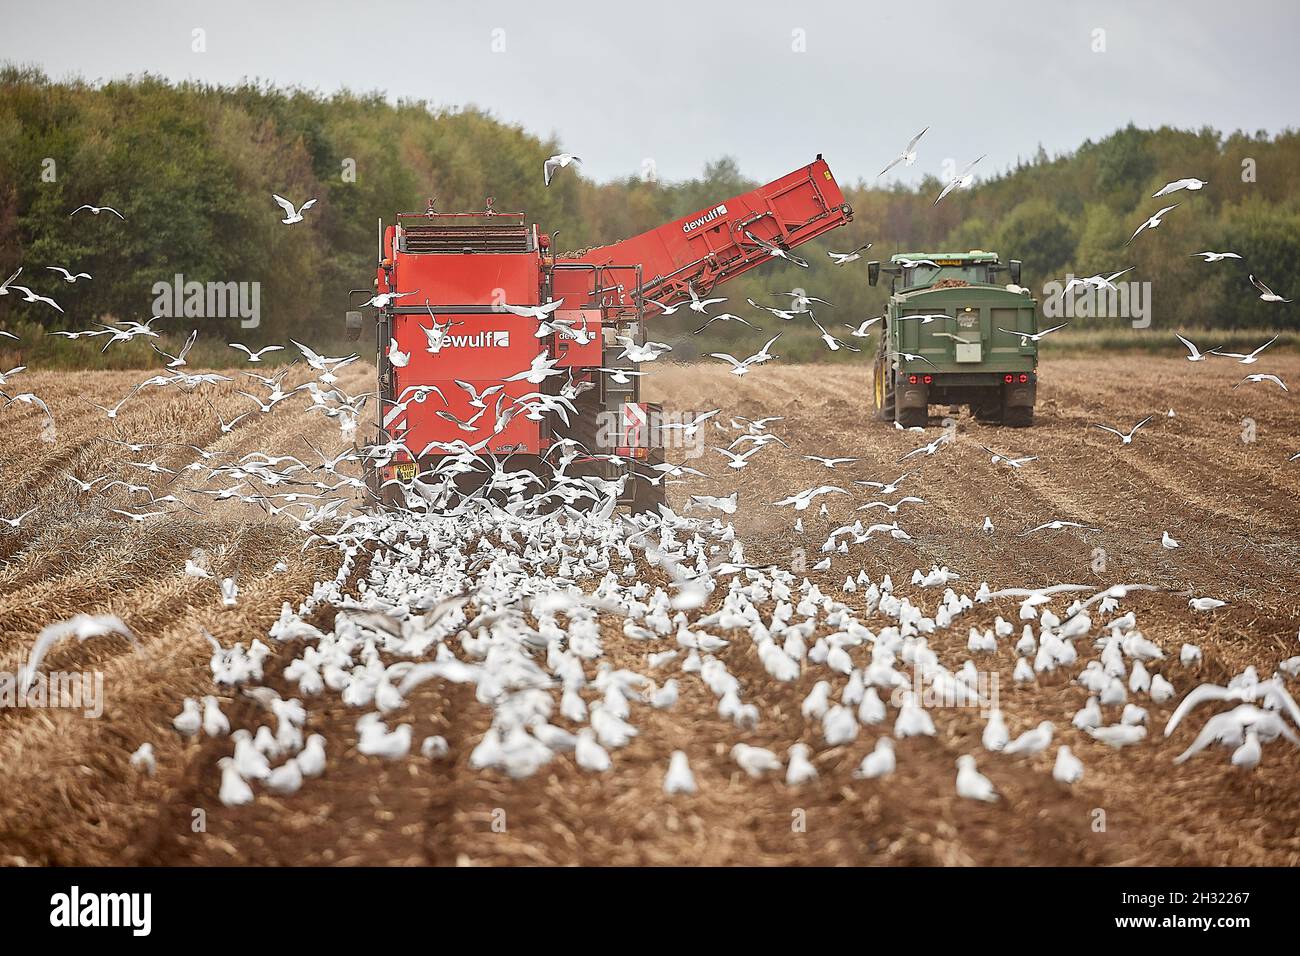 Thornton, Liverpool farming potato picking machines with seagulls following the DEWULF harvesting machinery for scraps Stock Photo